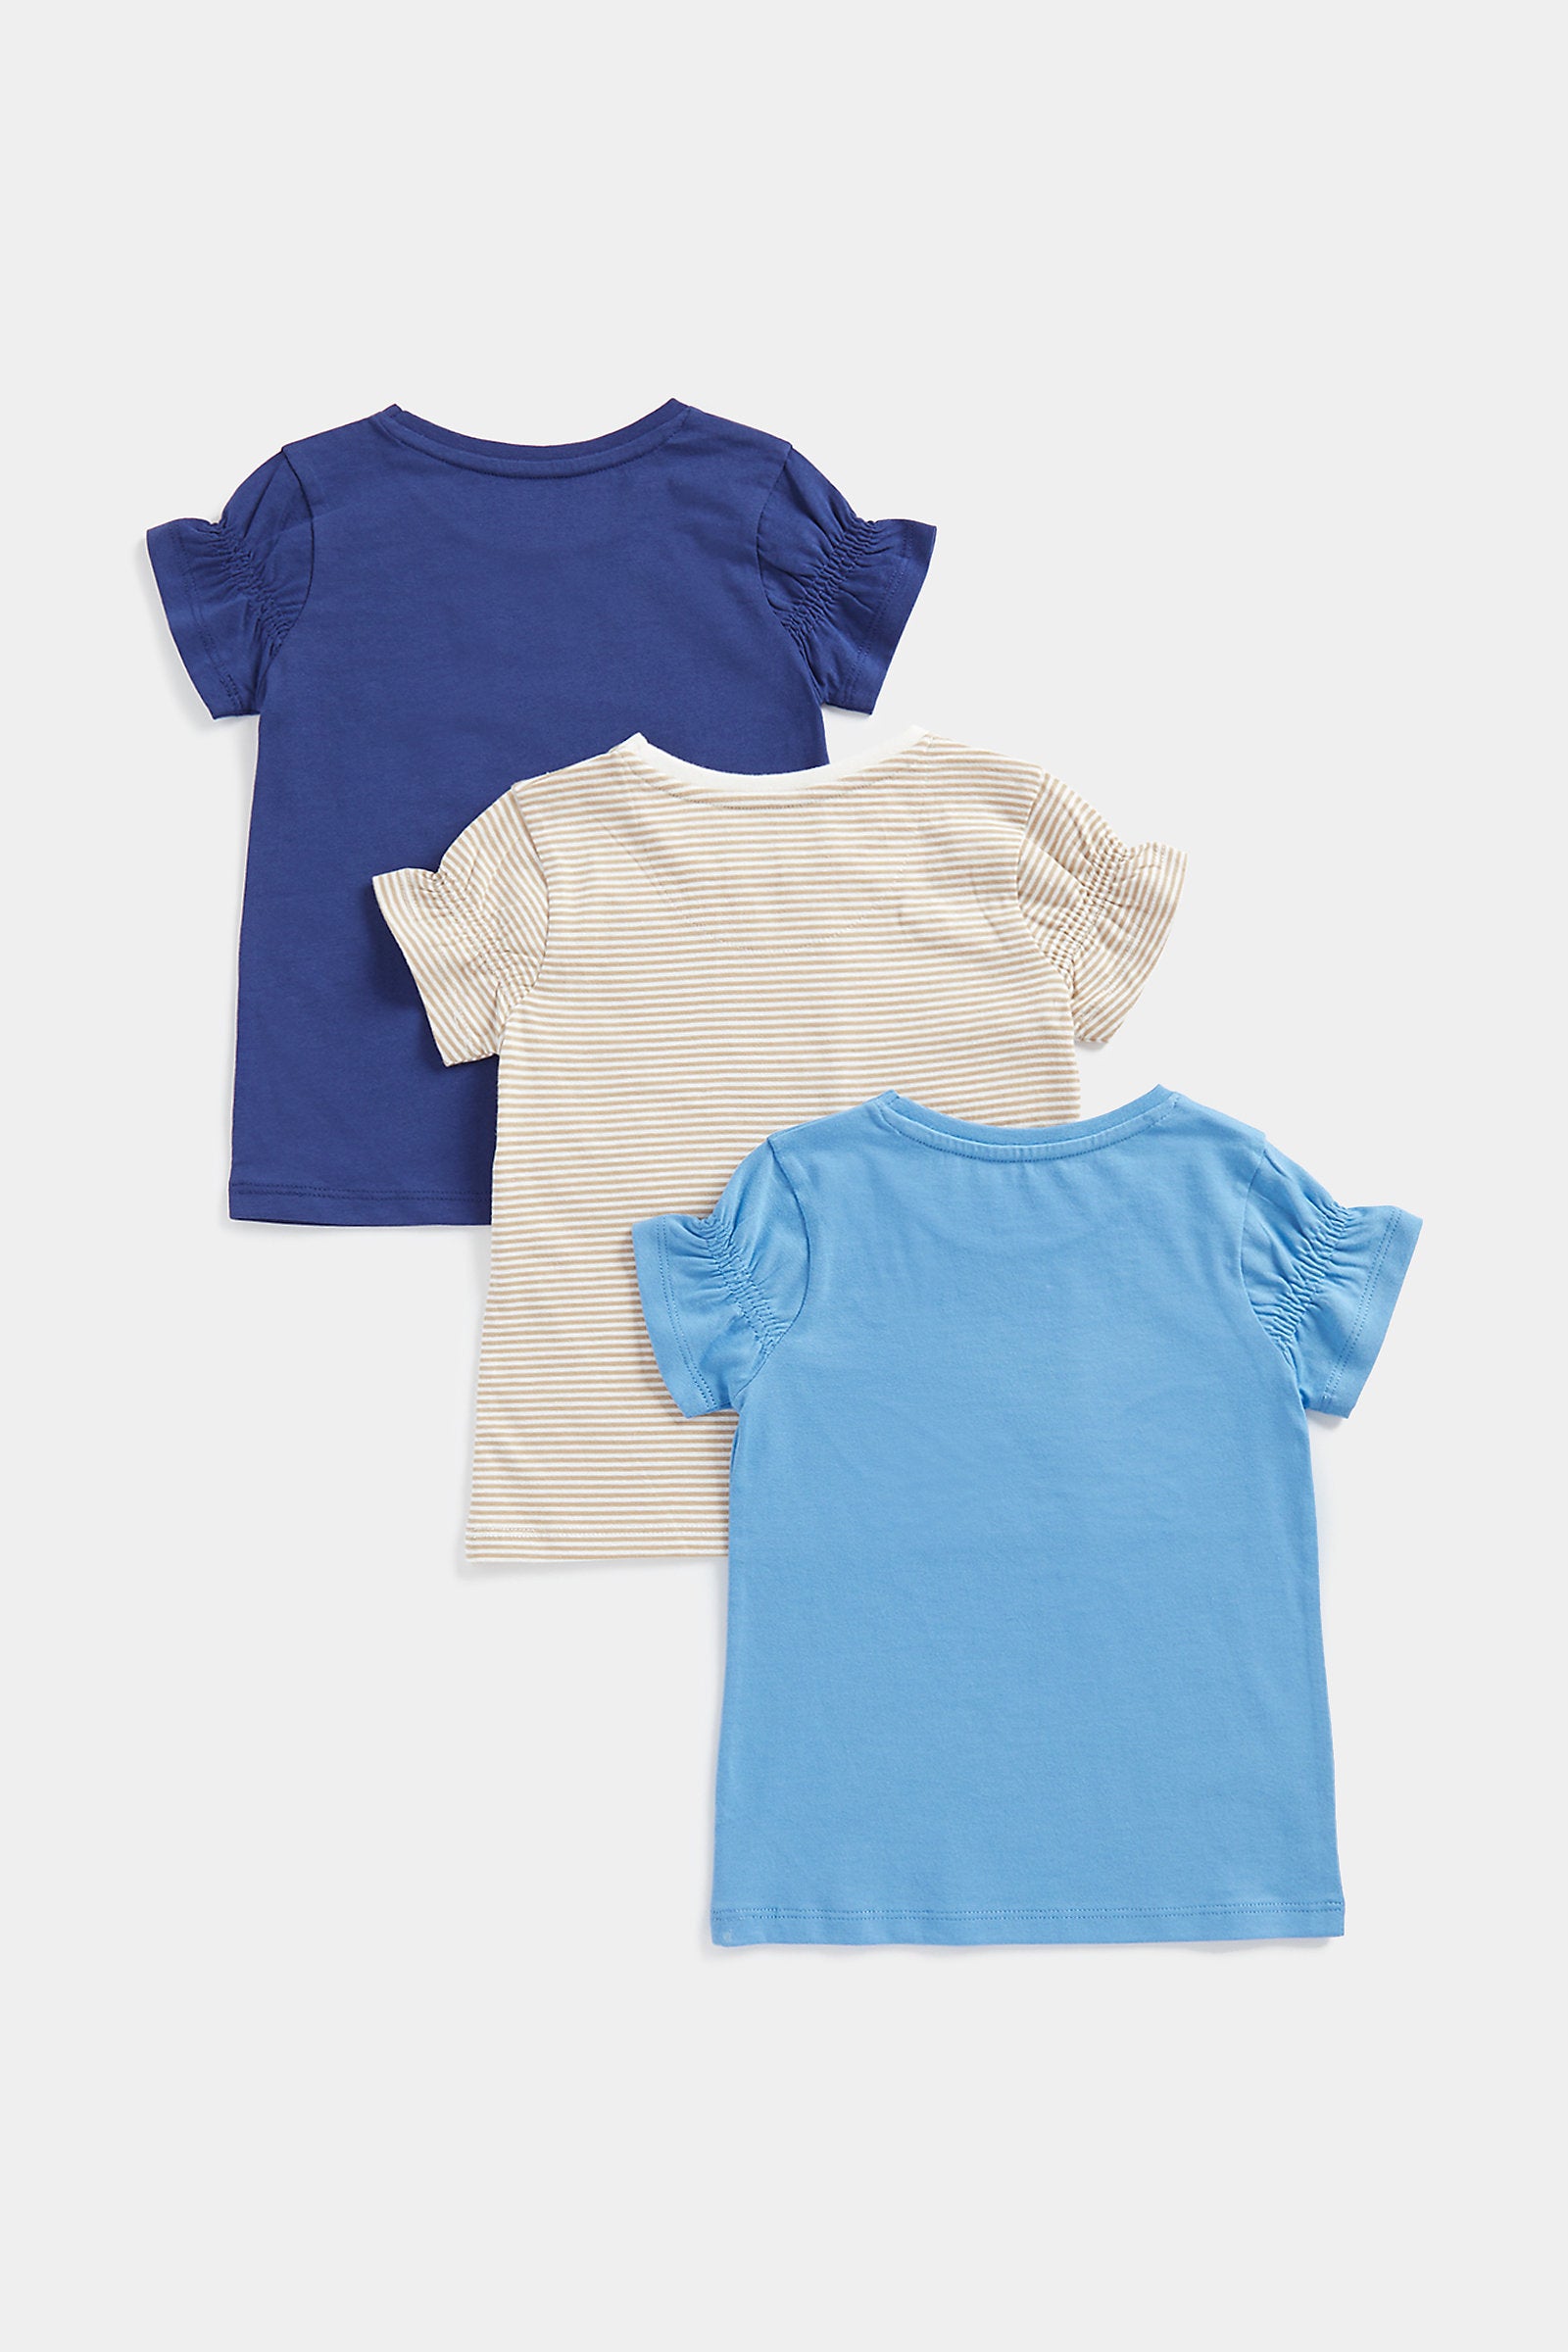 Mothercare Lavender Blue T-Shirts - 3 Pack